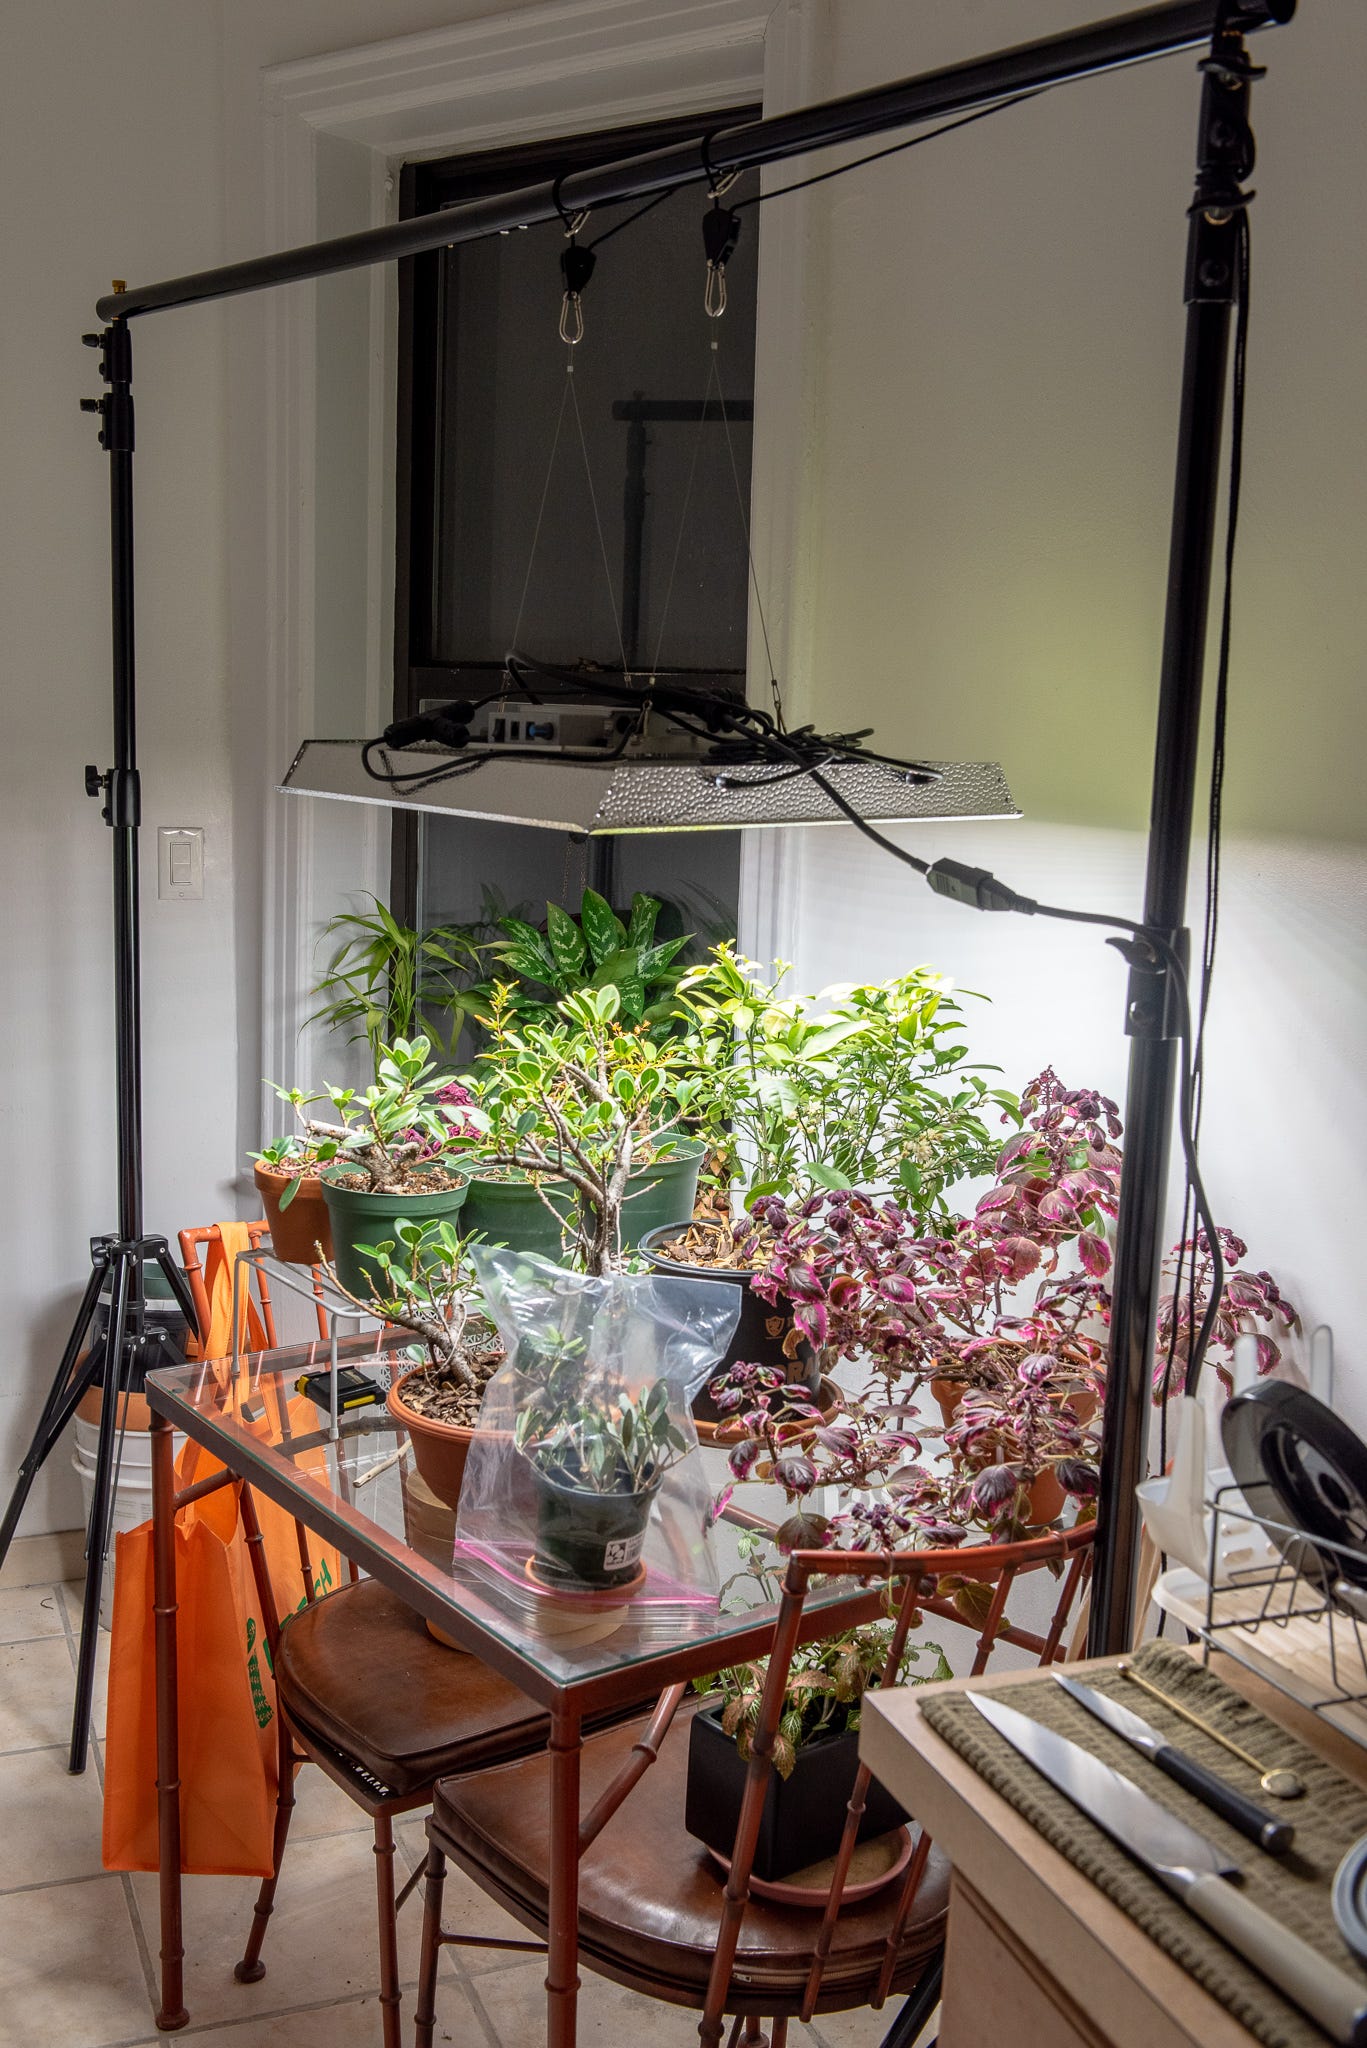 ID: My tropical zone setup in the corner of my kitchen. A large photo seamless backdrop stand straddles a kitchen table with plants and trees. The stand is holding up a rectangular LED grow light above the plants.